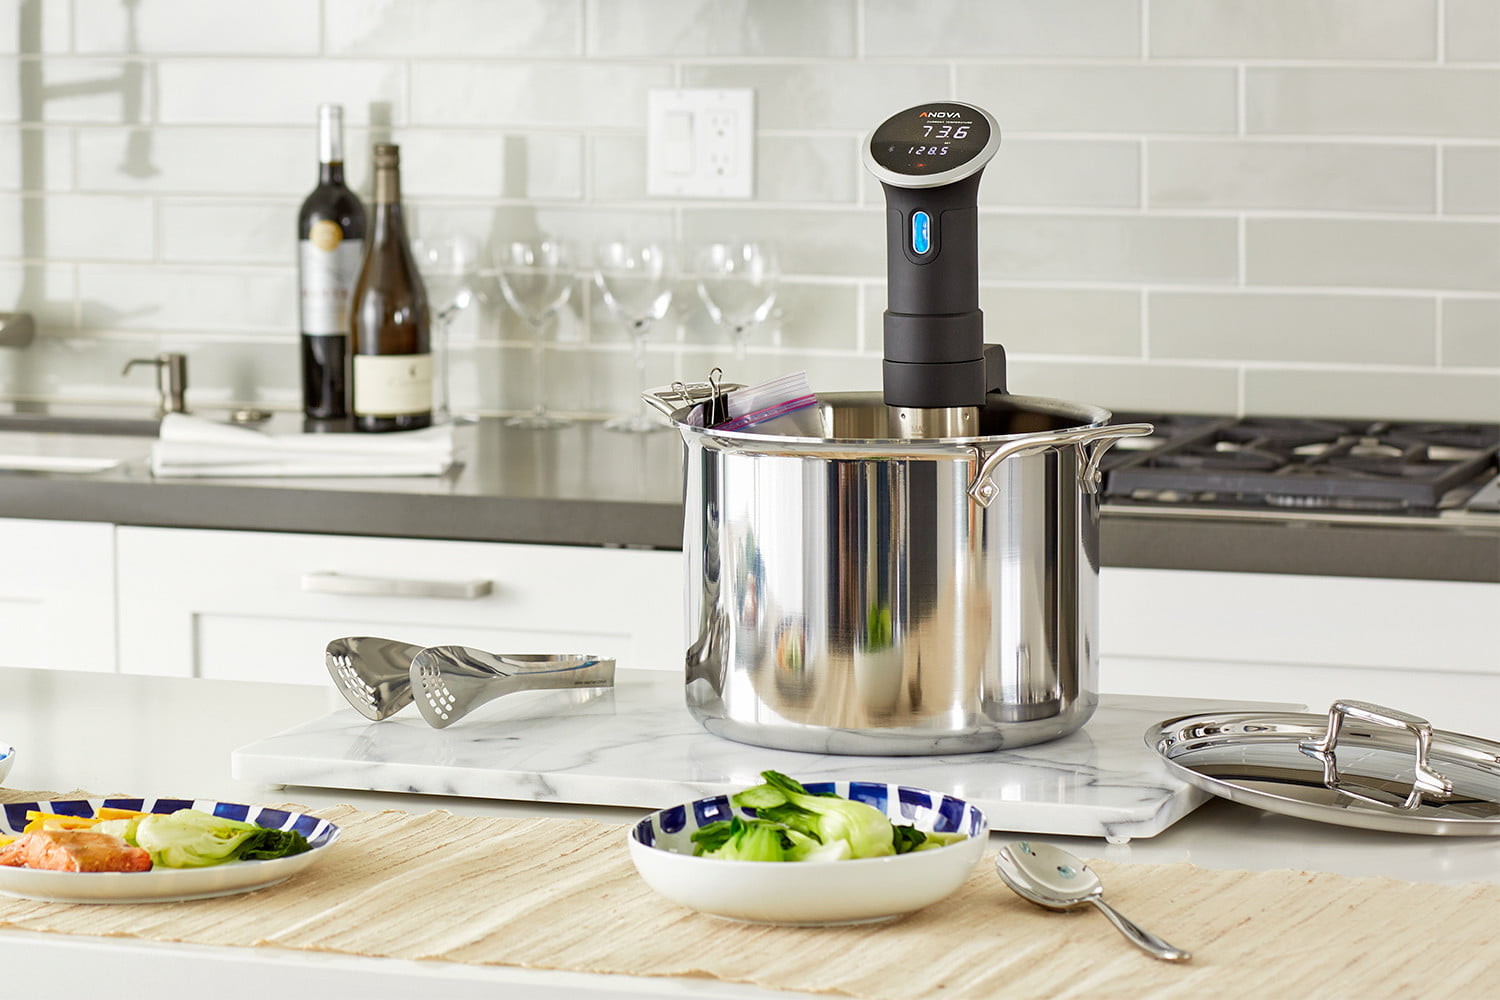 Here are the kitchen tools and appliances that made our year of pandemic  cooking better